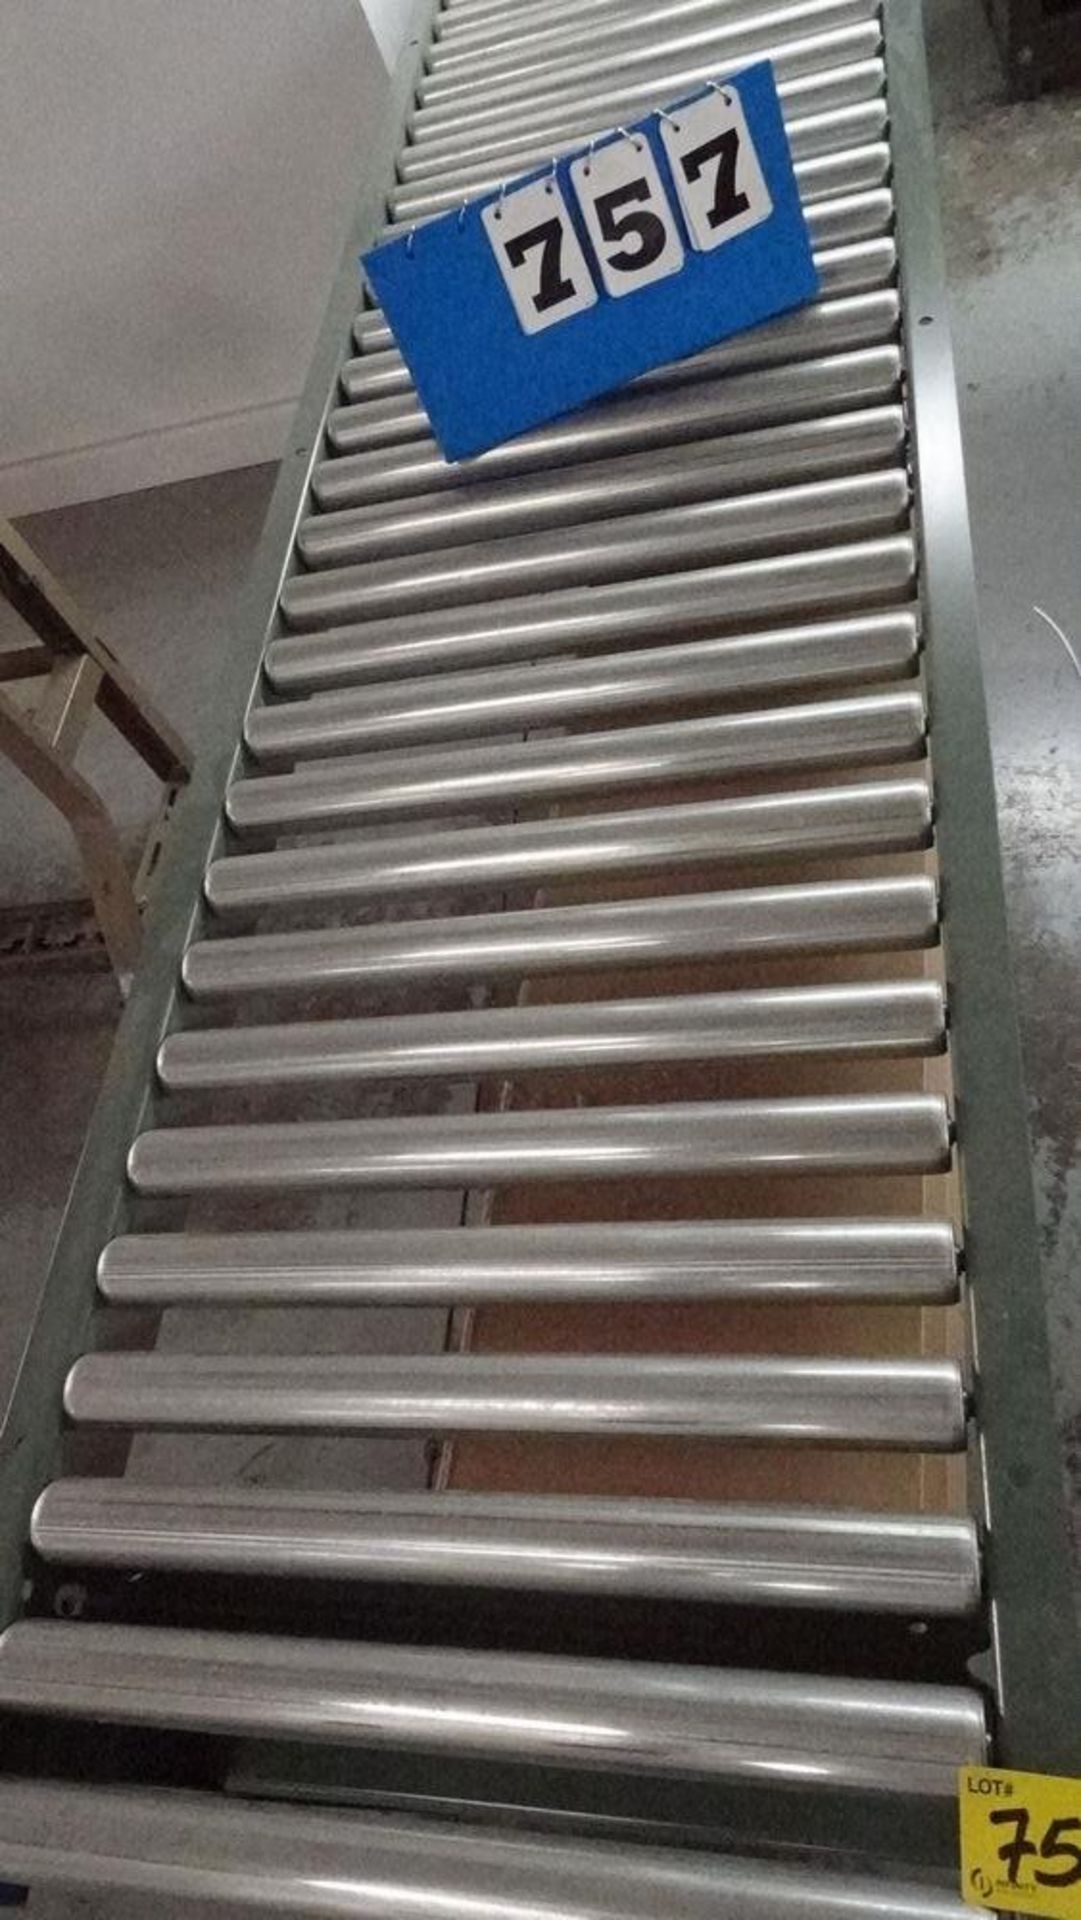 (4) SECTIONS OF GRAVITY ROLLER CONVEYORS (24" X 15') (24" X 15') (24" X 10') (24" X 42') - Image 3 of 8